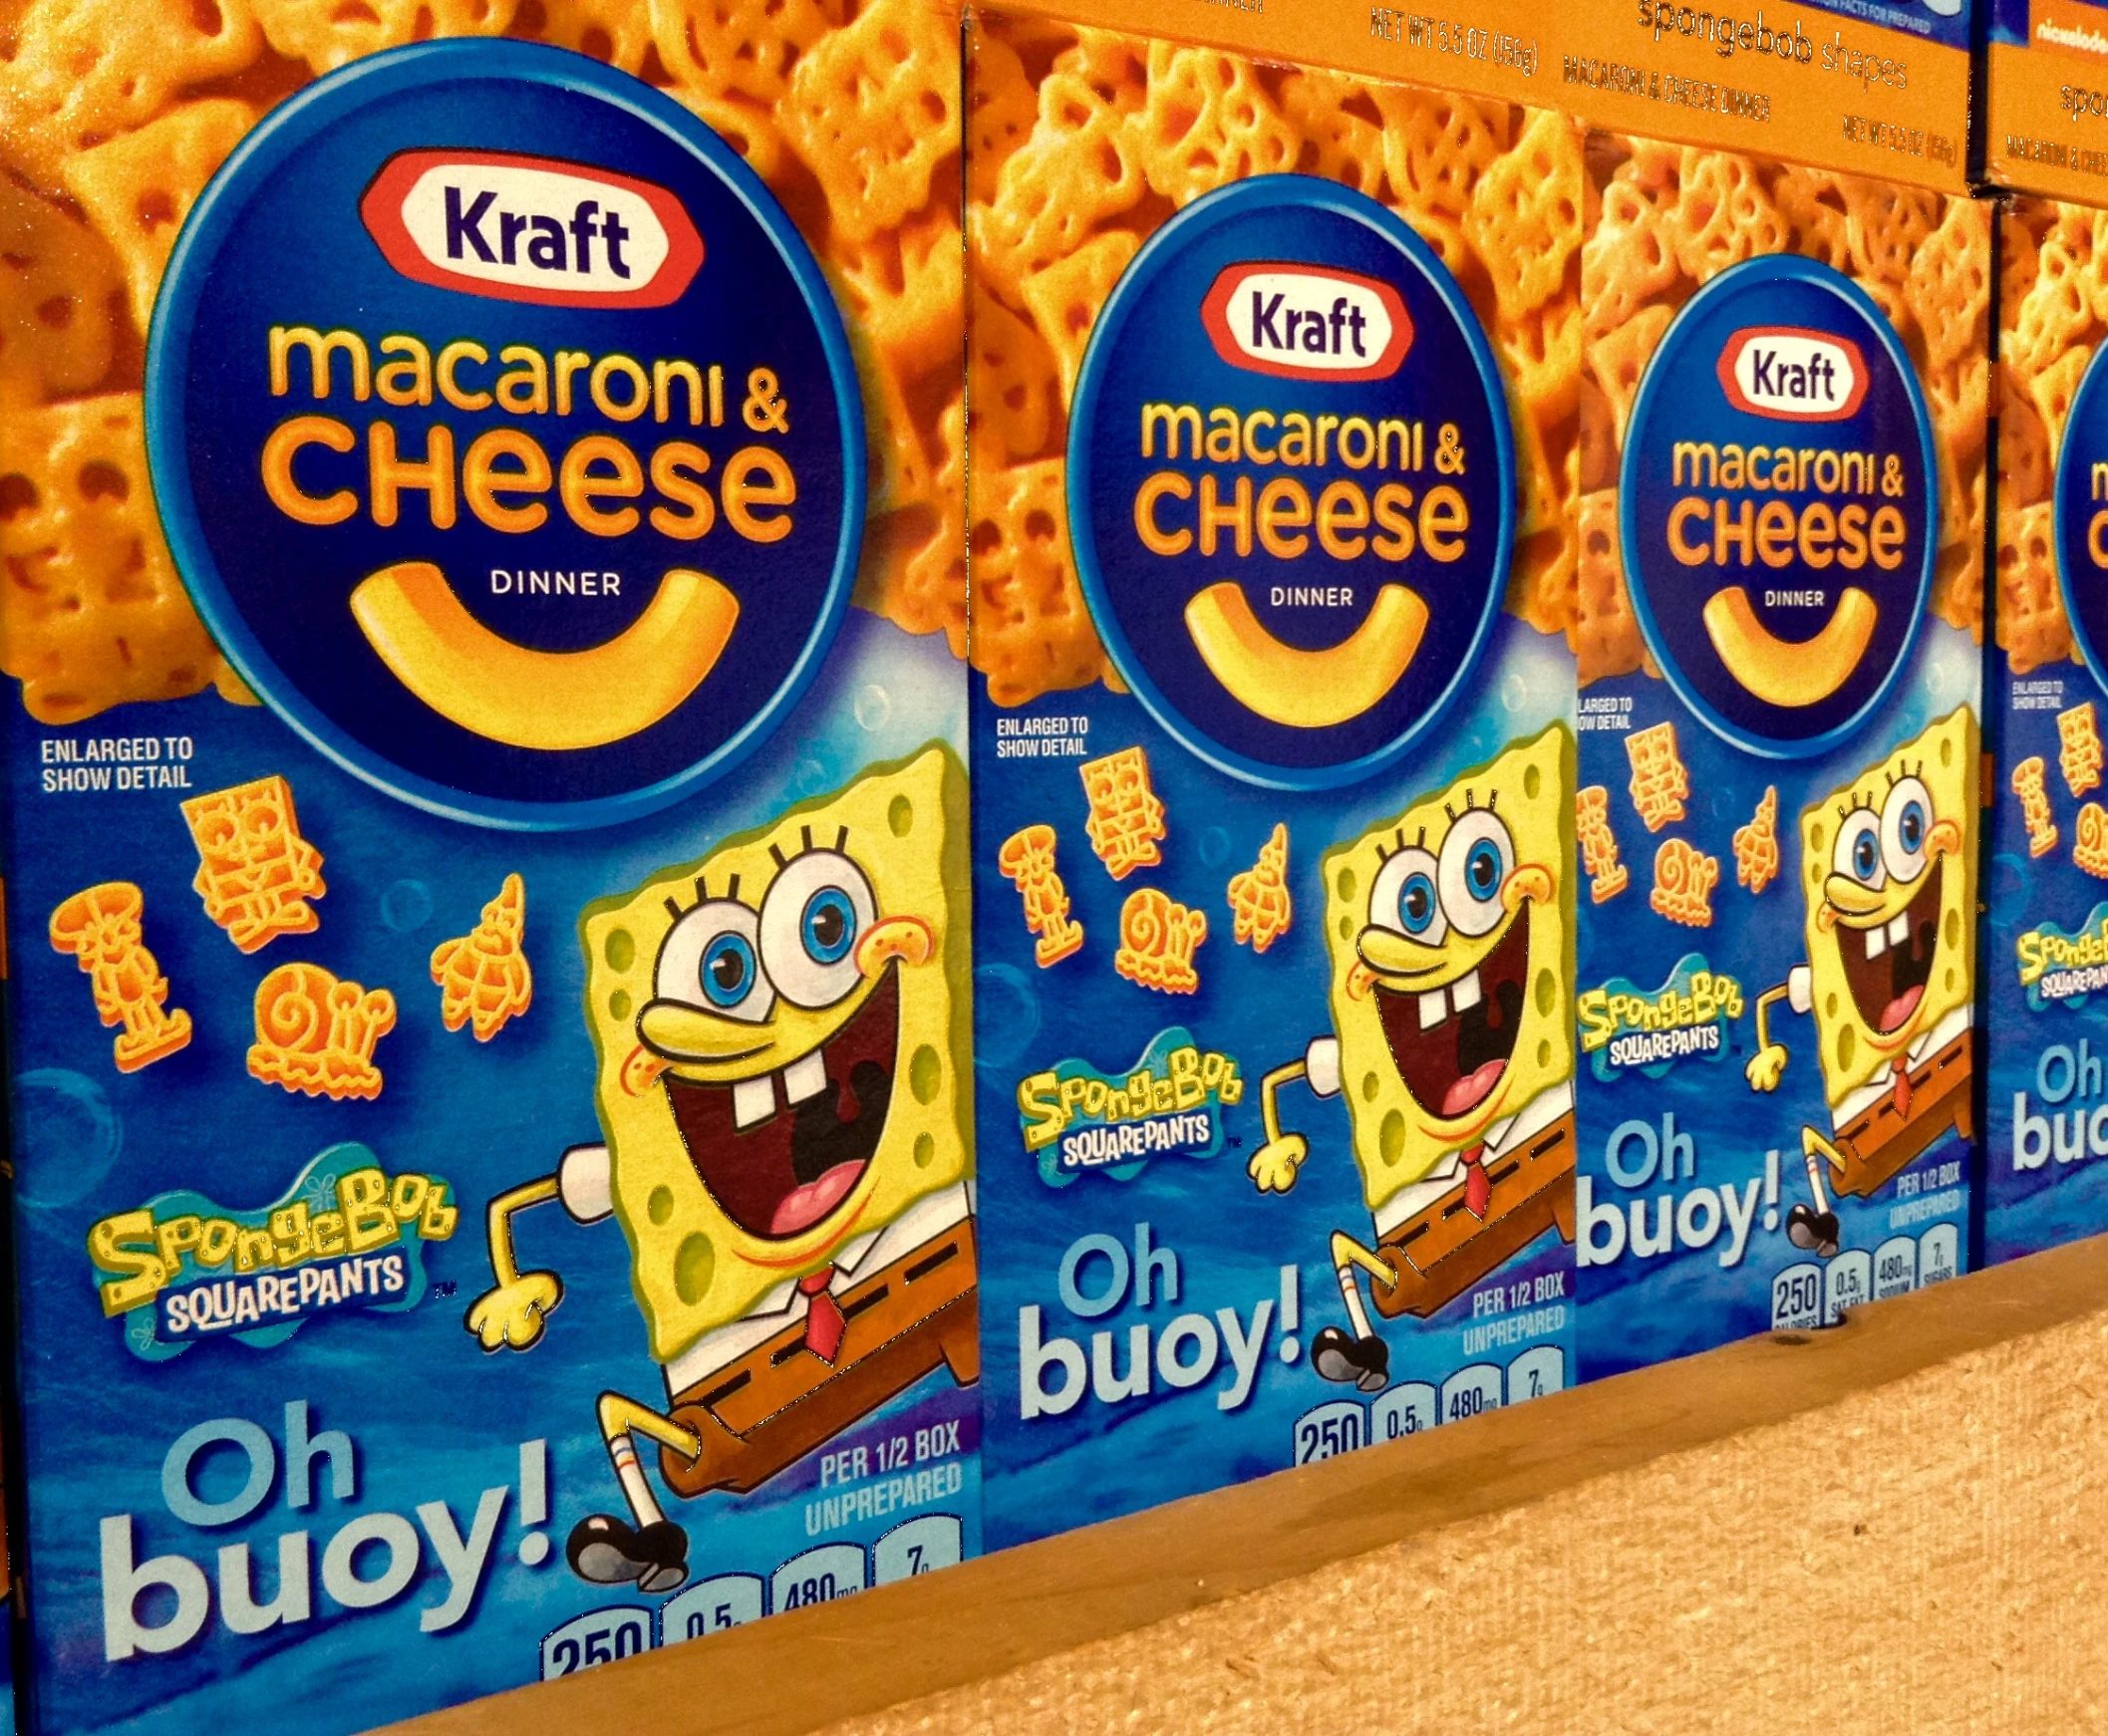 several packages of macaroni and cheese are on display